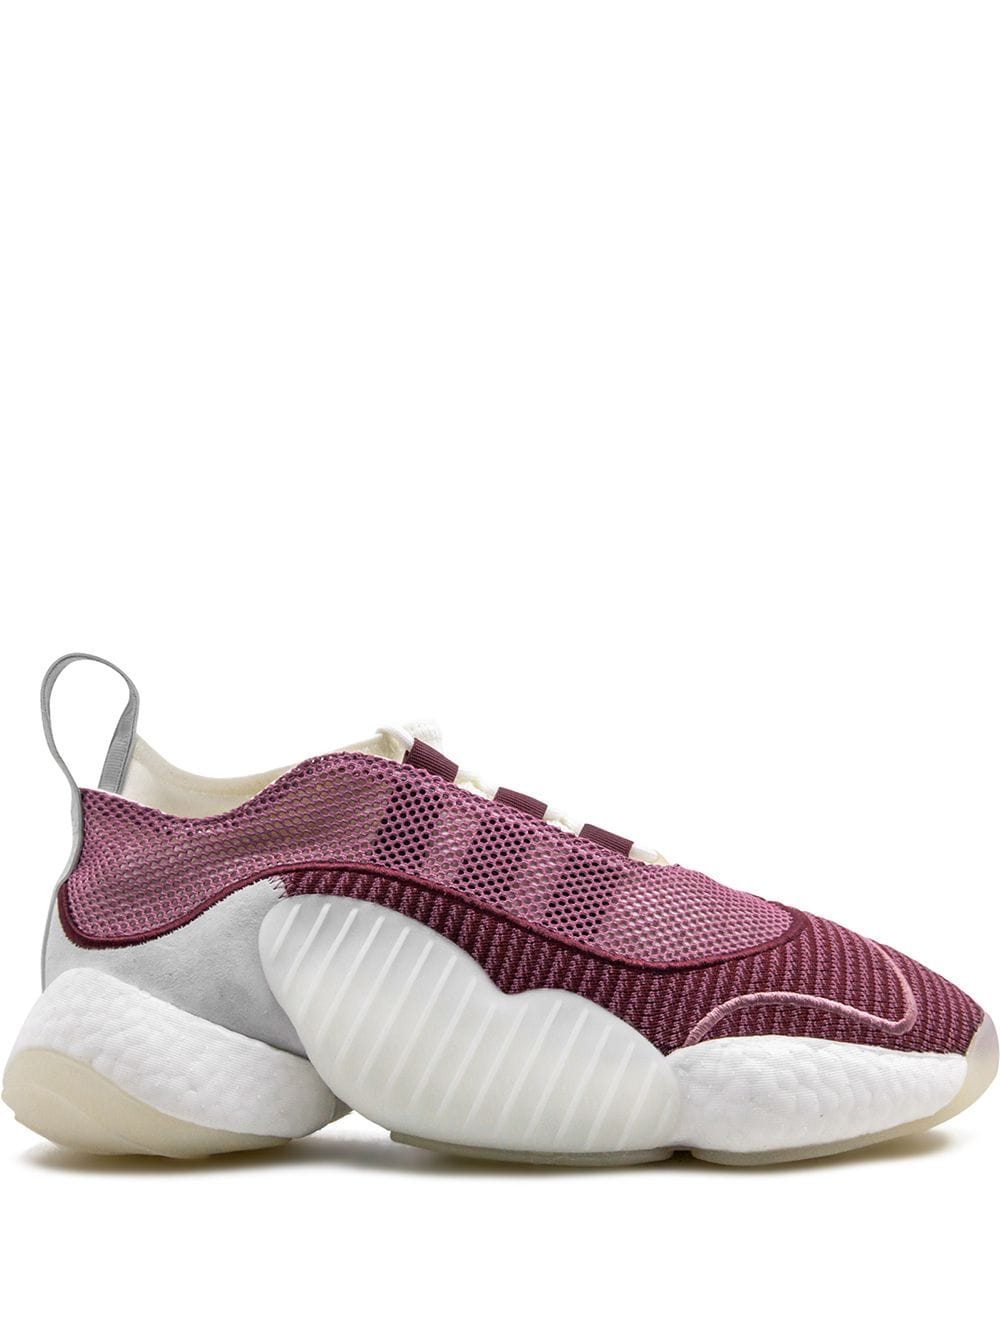 adidas Crazy BYW 2 low-top sneakers - Pink von adidas